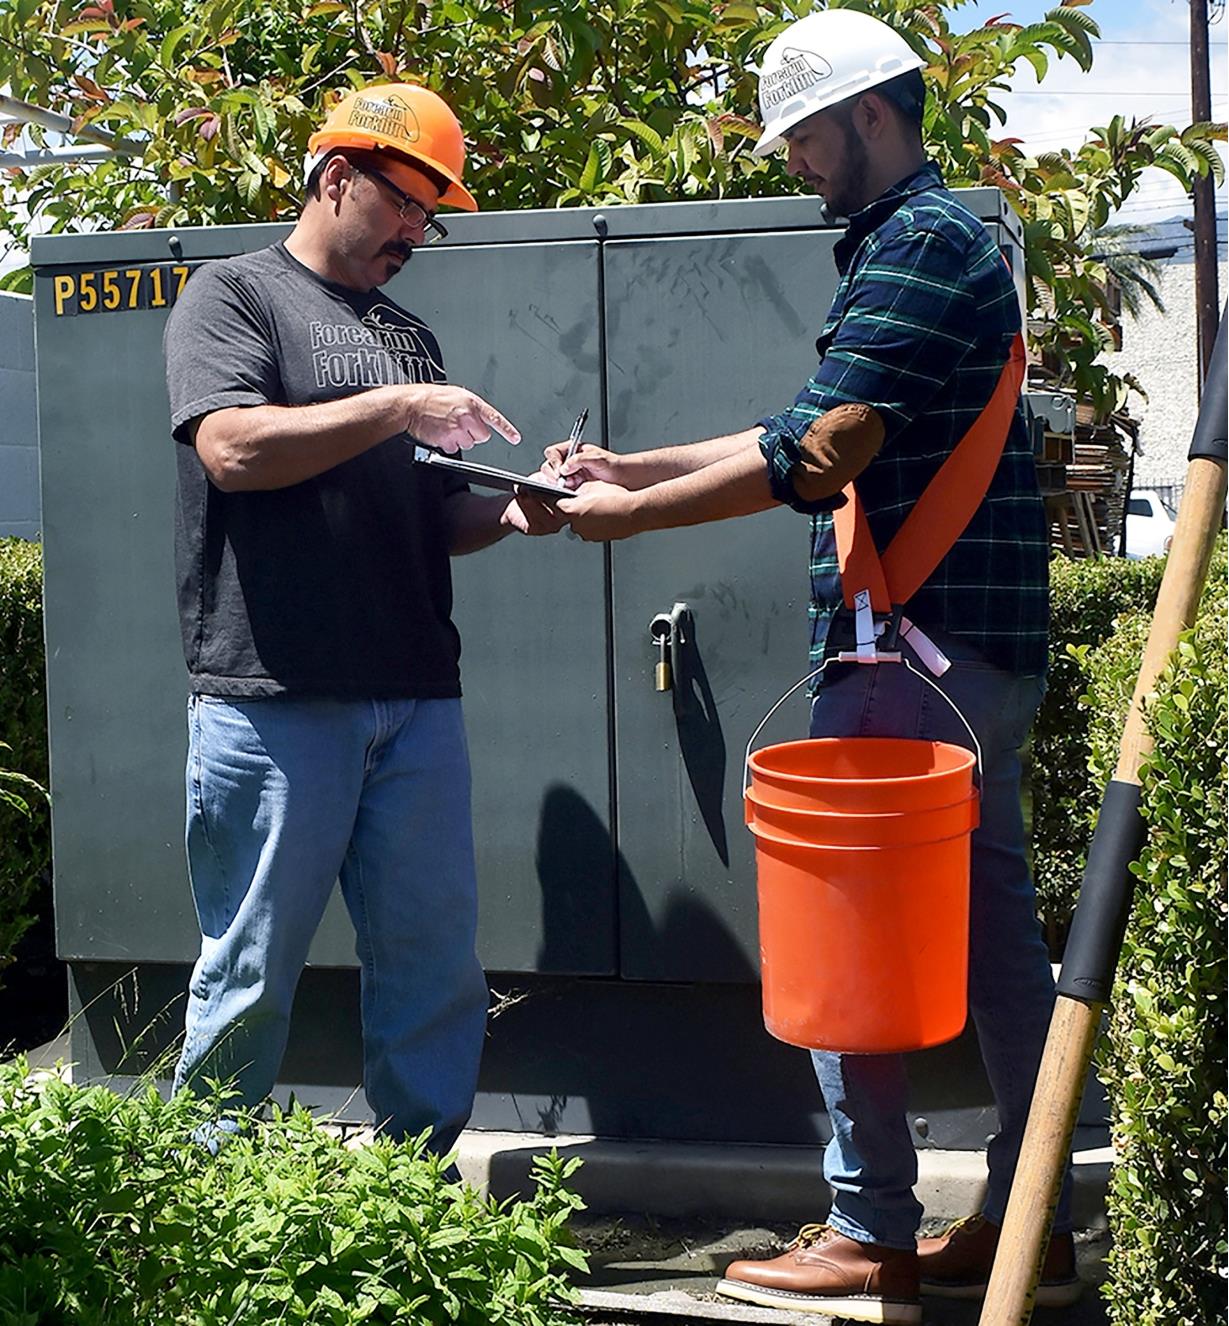 A man uses a Bucket Buddy Sash to hold a pail off the ground, freeing his hands to fill out forms